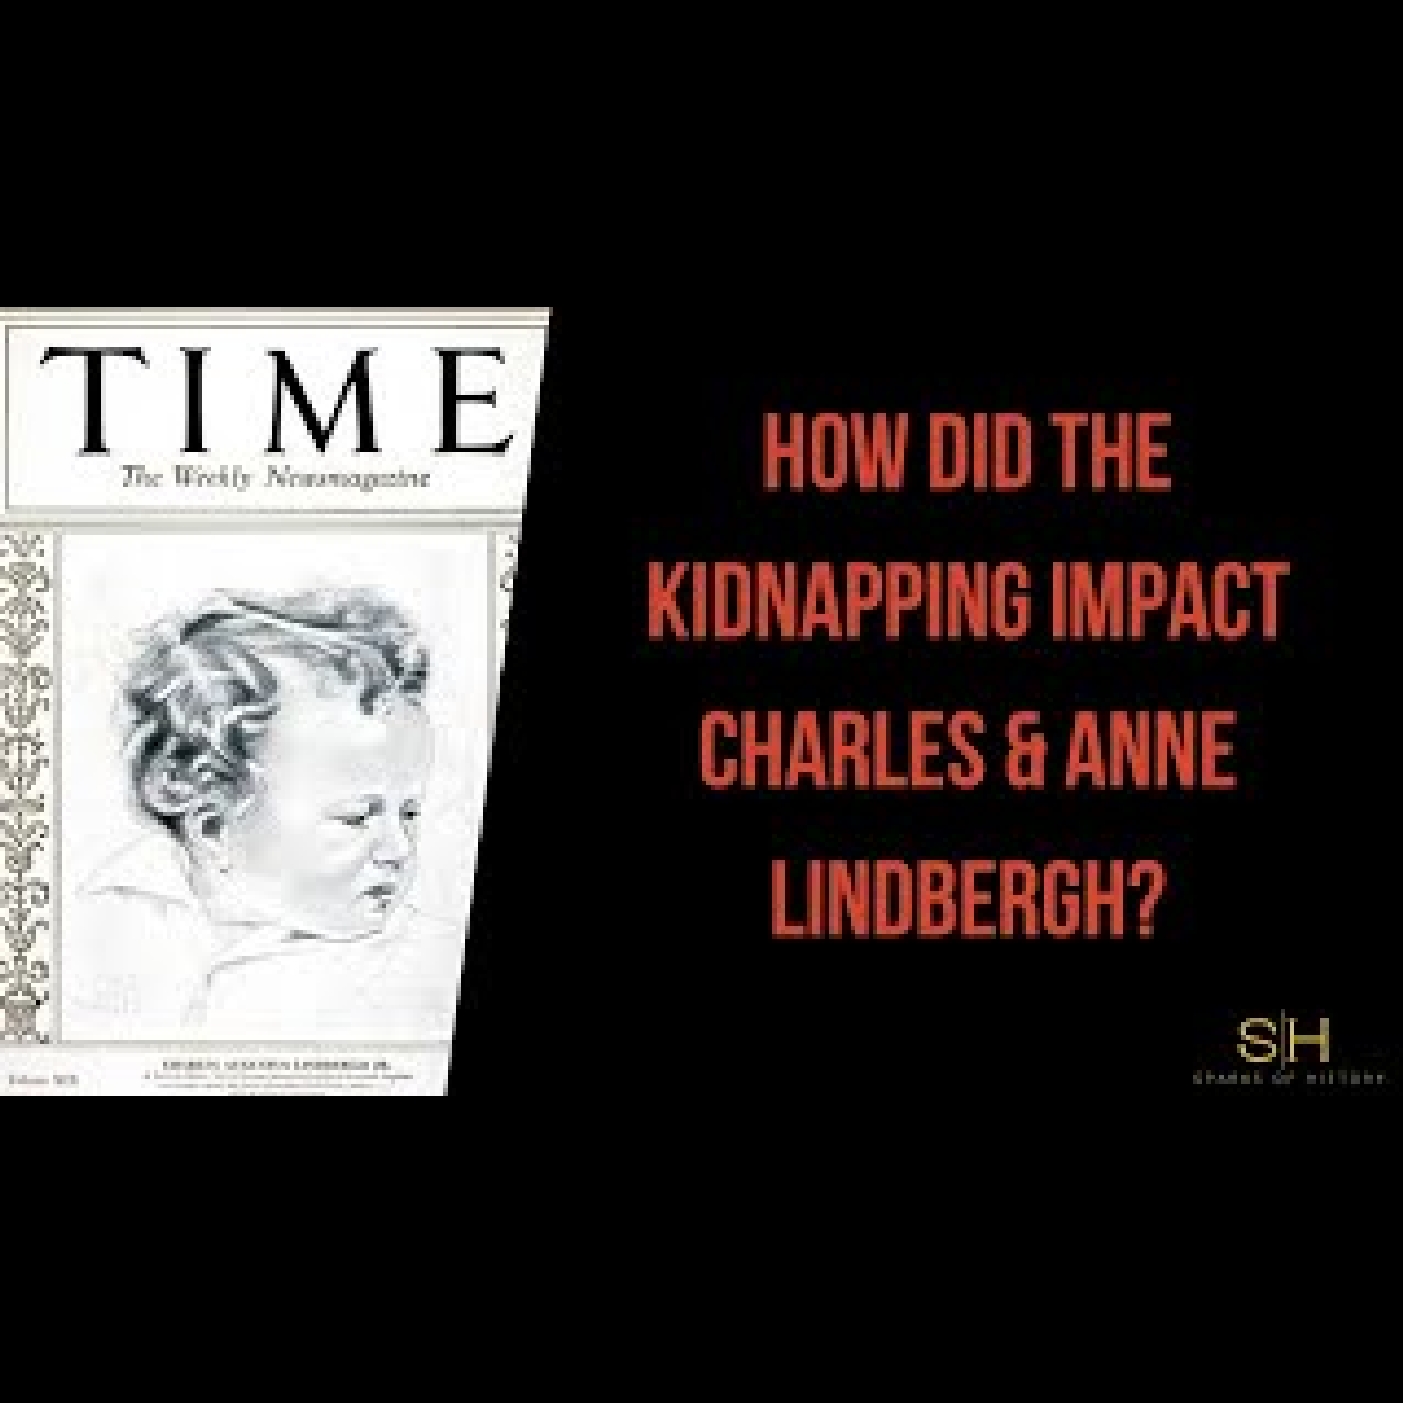 Charles Lindbergh #7 - How did the Kidnapping Impact Charles and Anne Lindbergh?